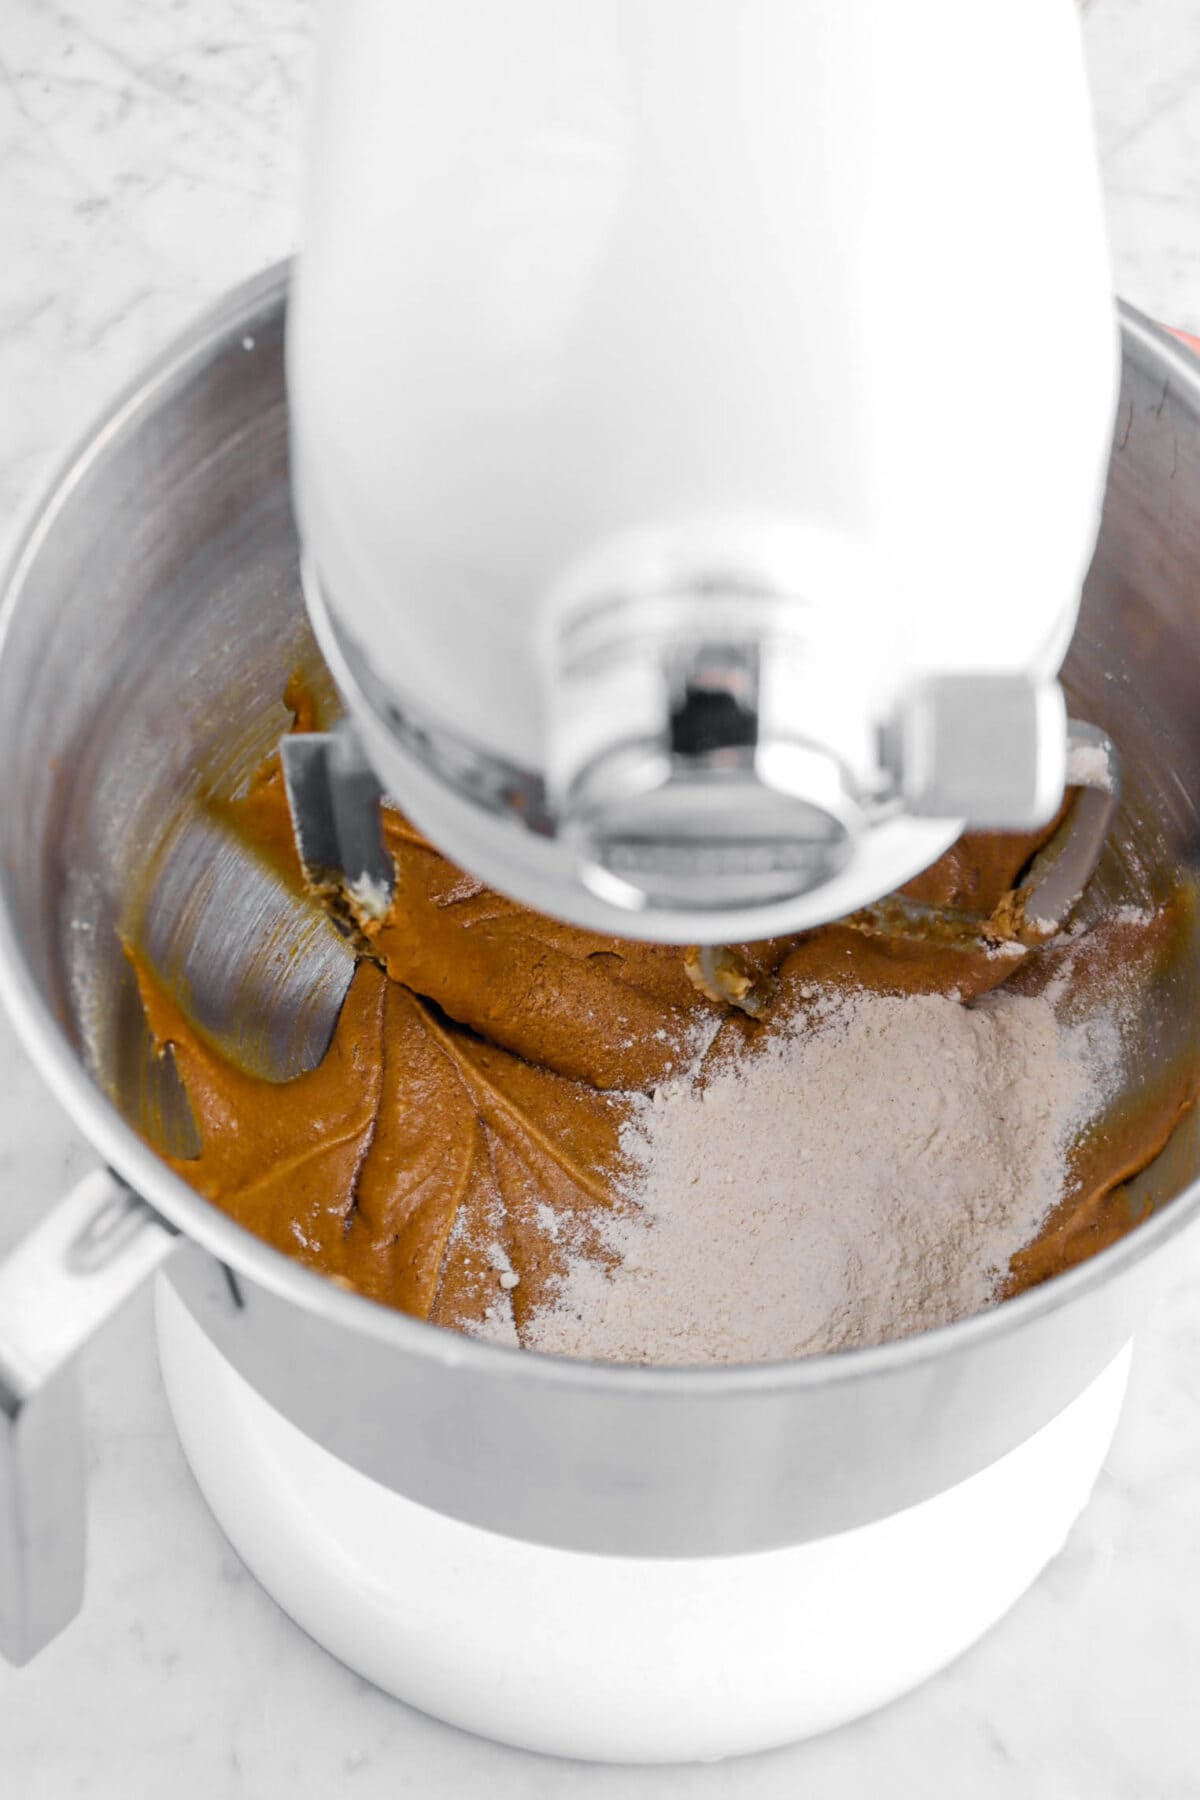 dry ingredients added to molasses mixture.